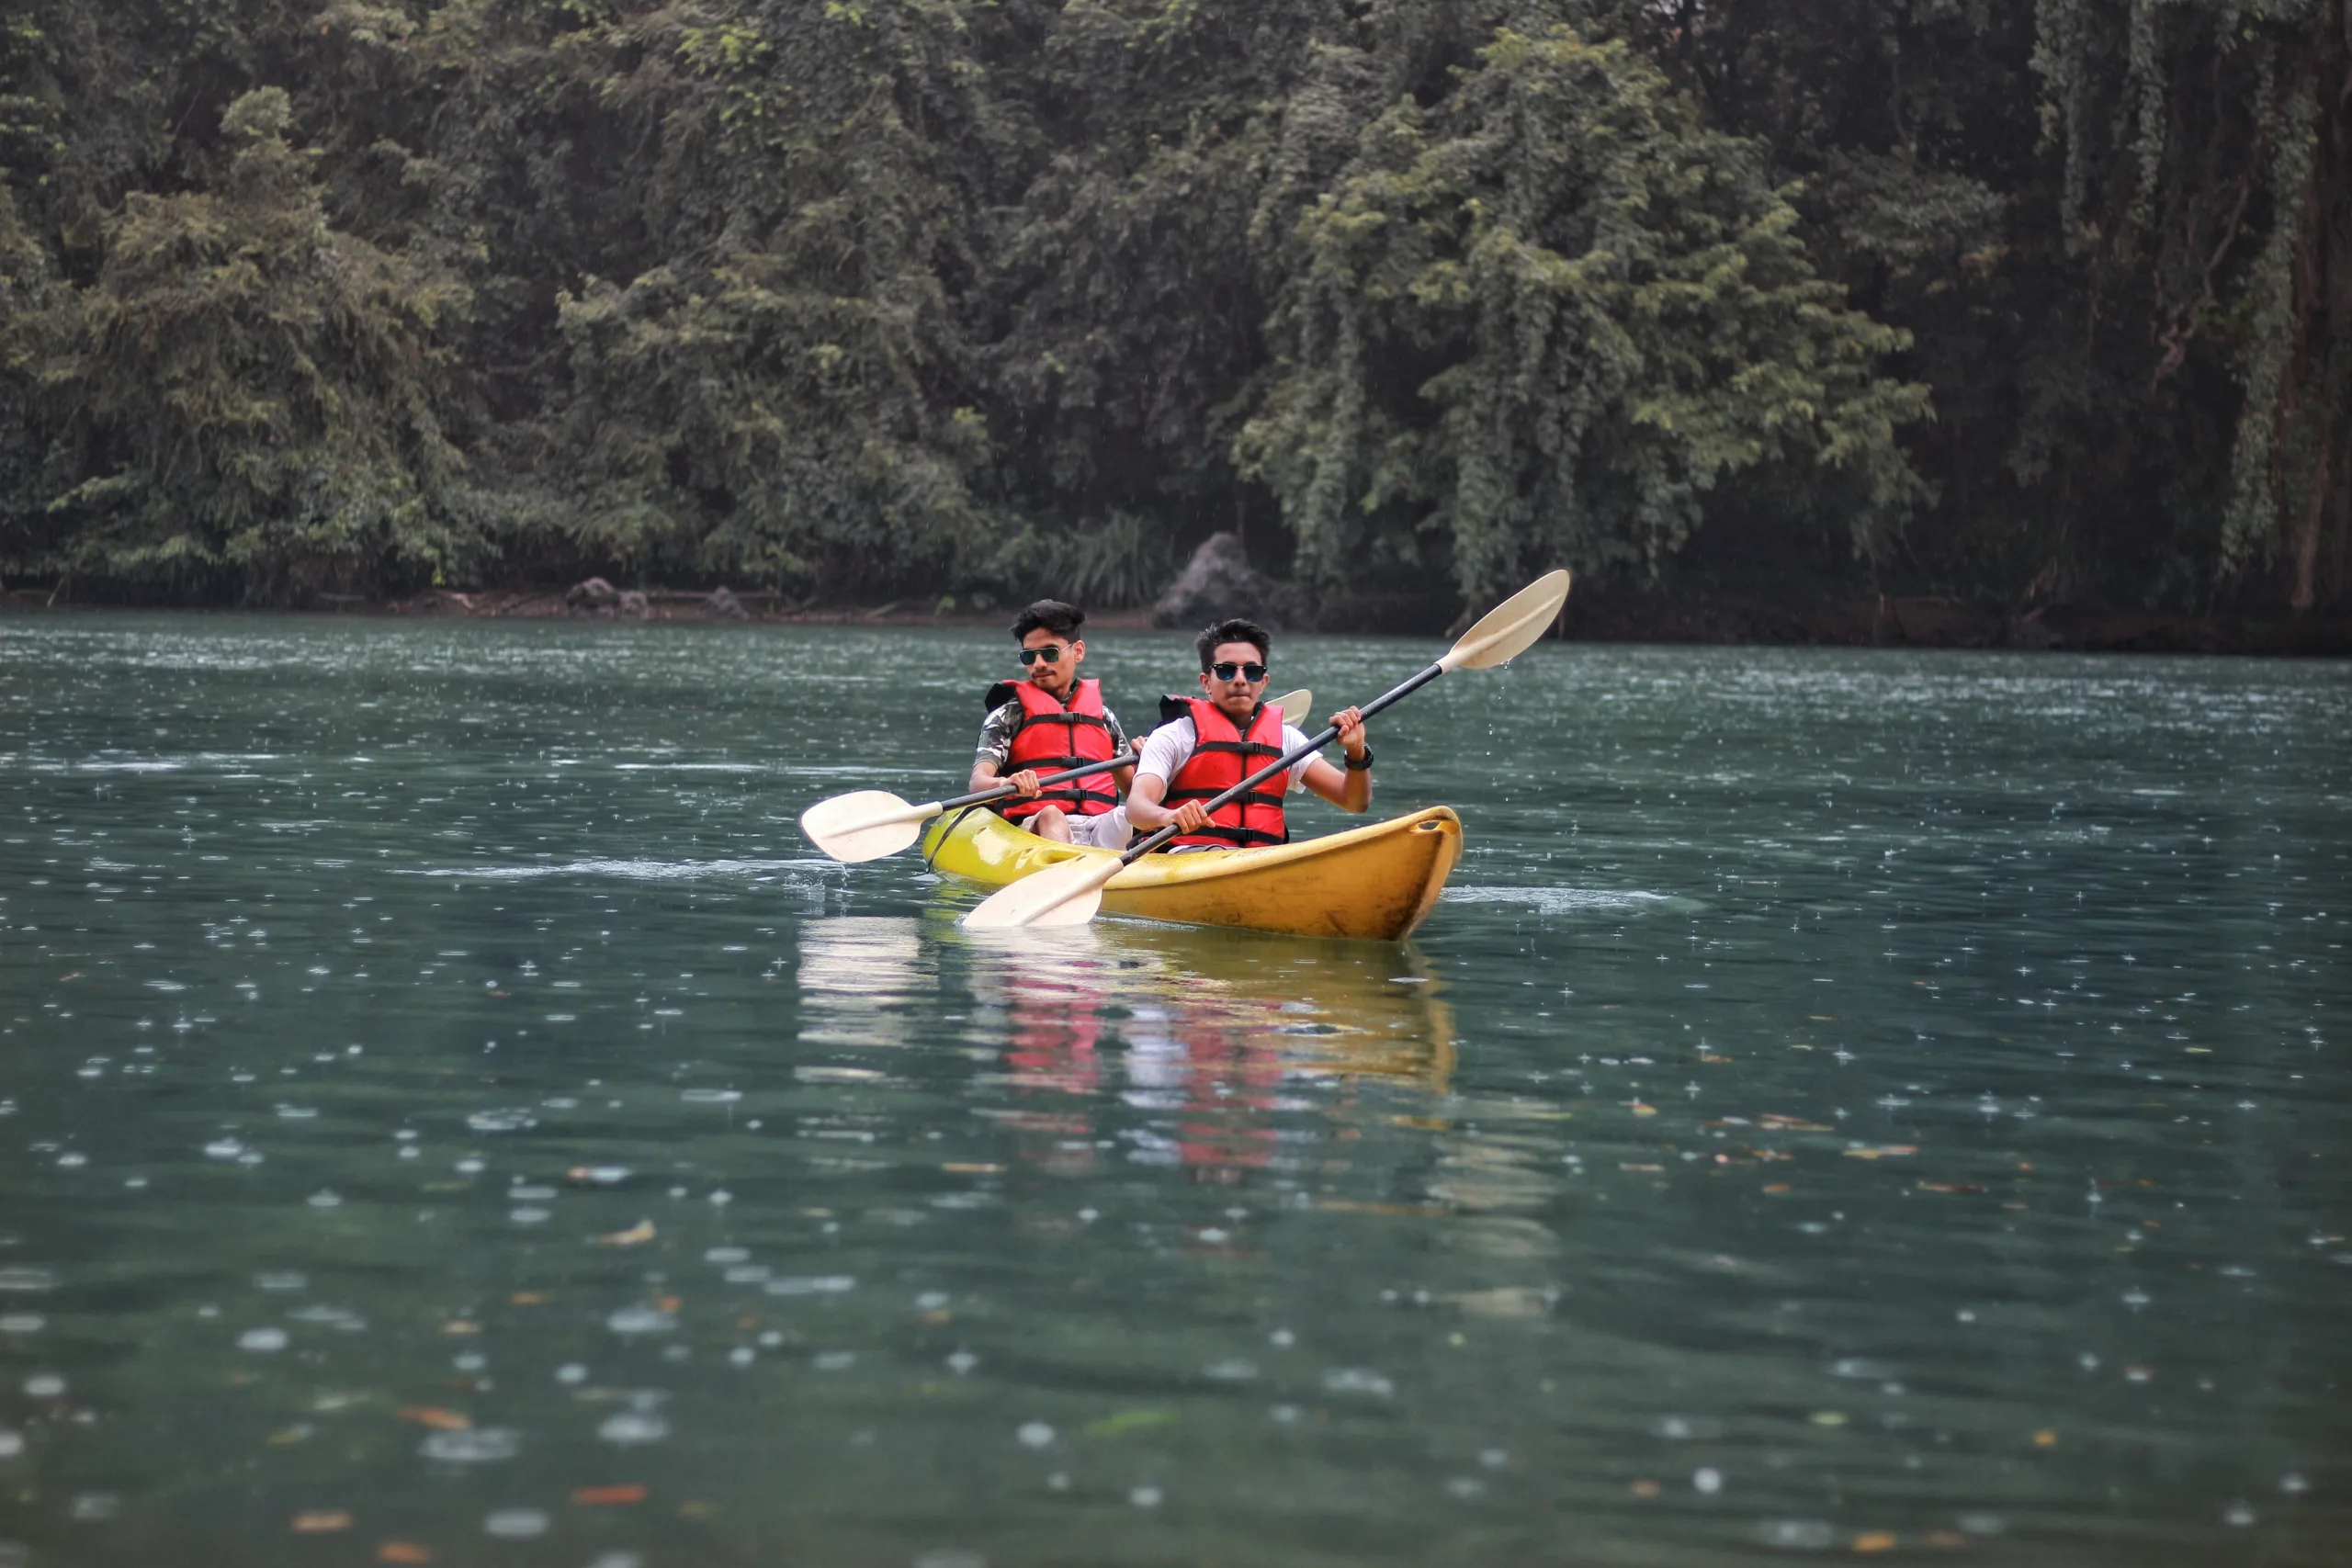 Two people paddling a canoe in a scenic lake